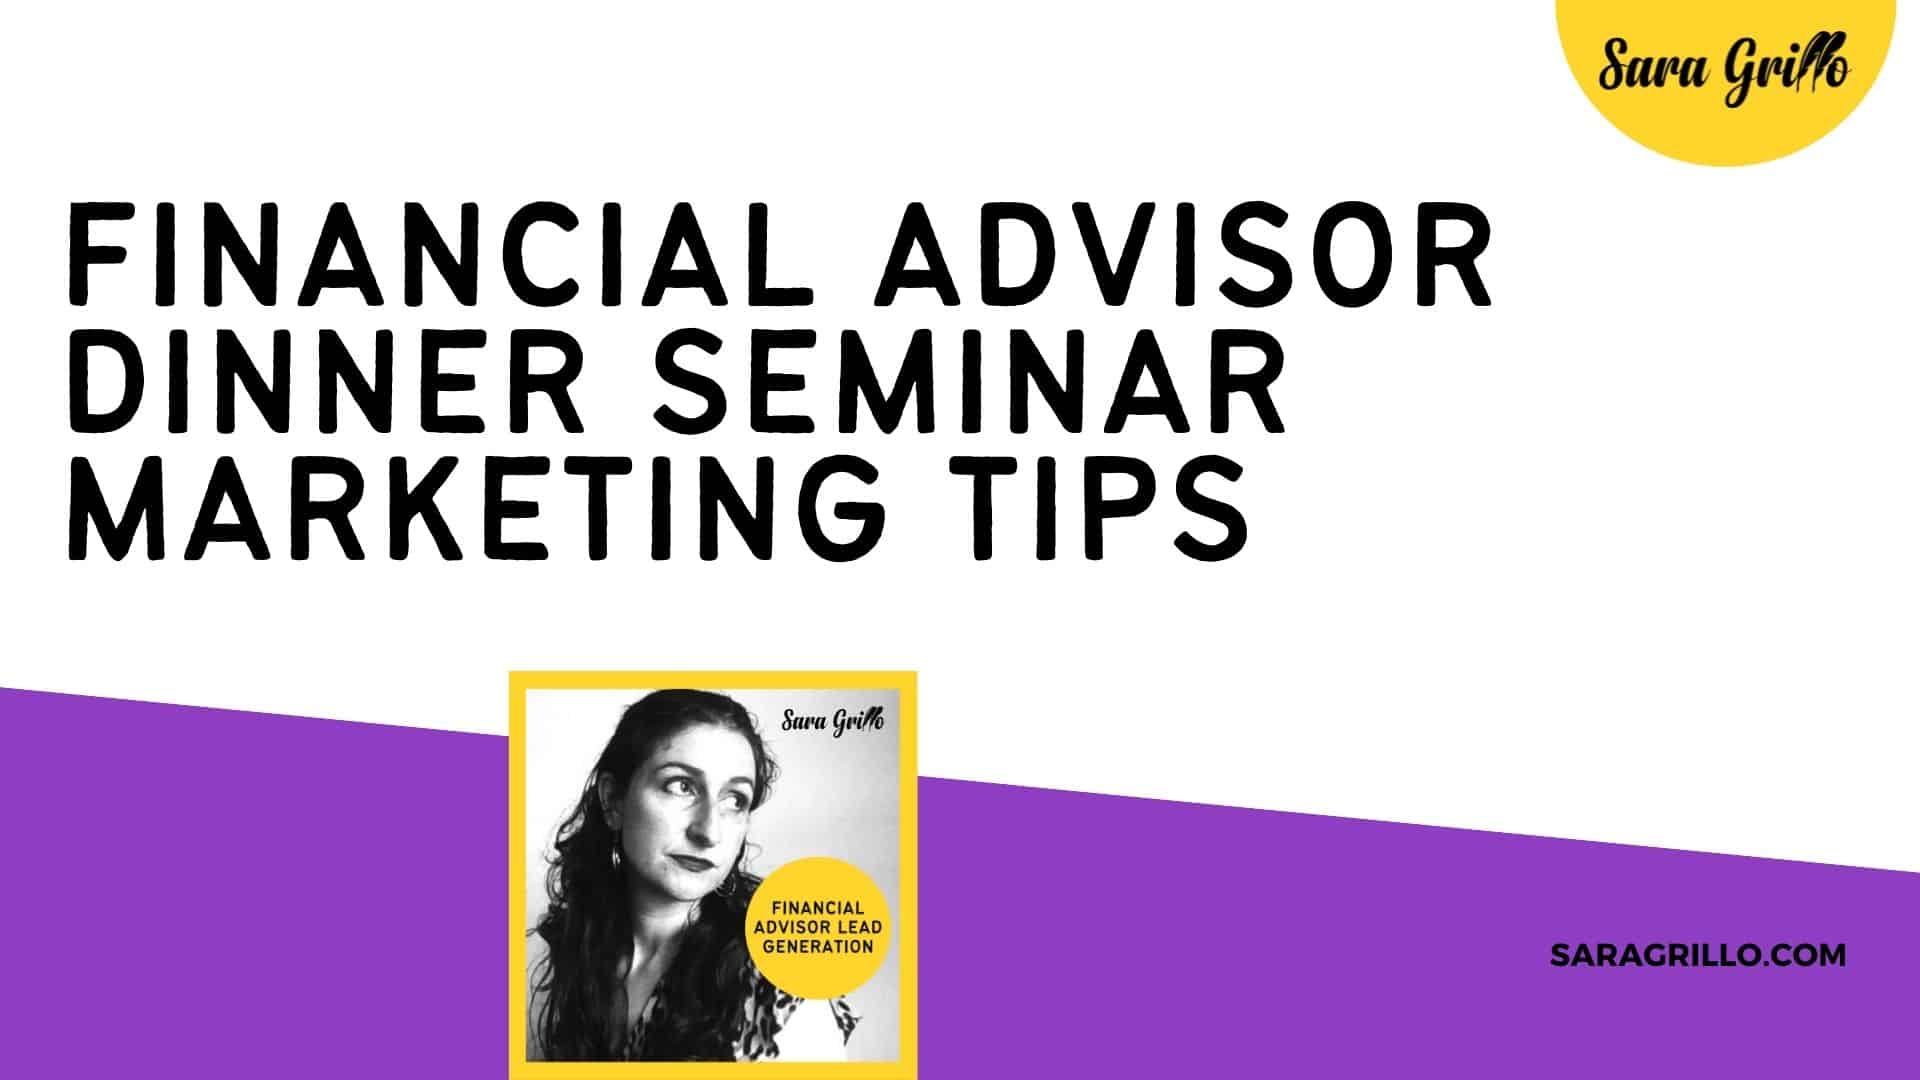 Here are some great financial advisor dinner seminar marketing tips from an experienced expert.